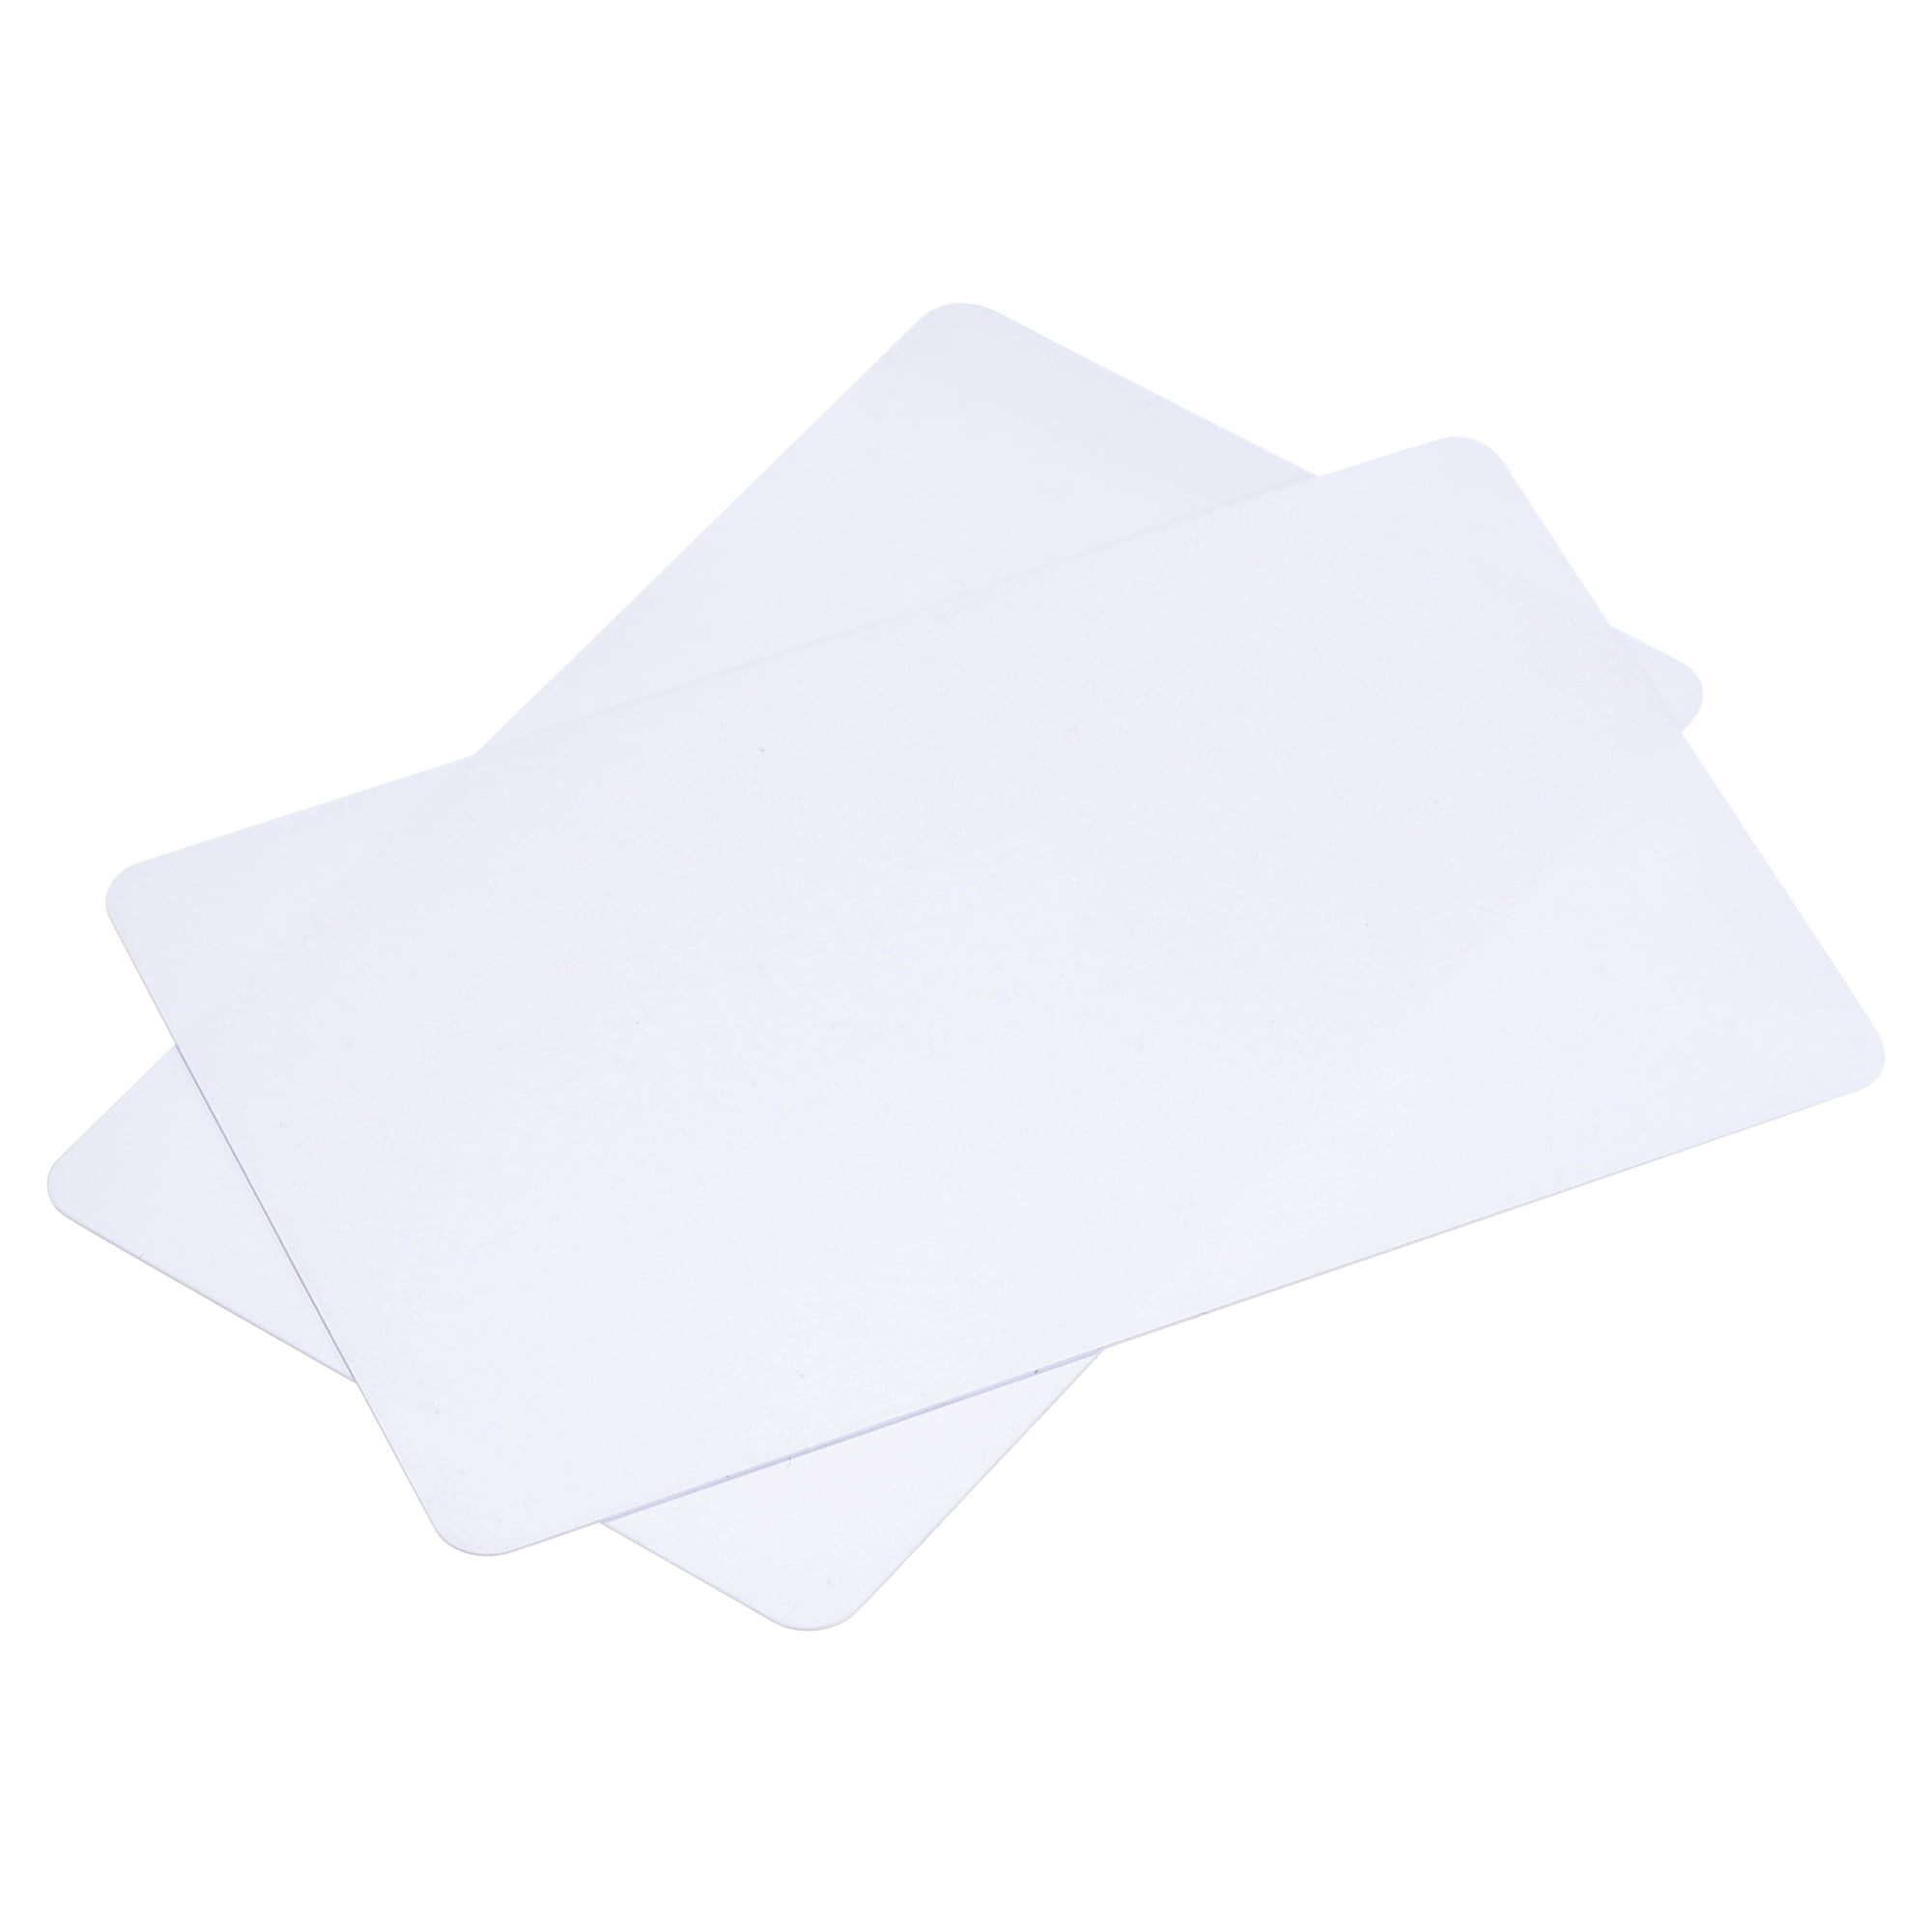 Vertical Blank White Slot Punched Plastic PVC Cards For Badge/Card Printers